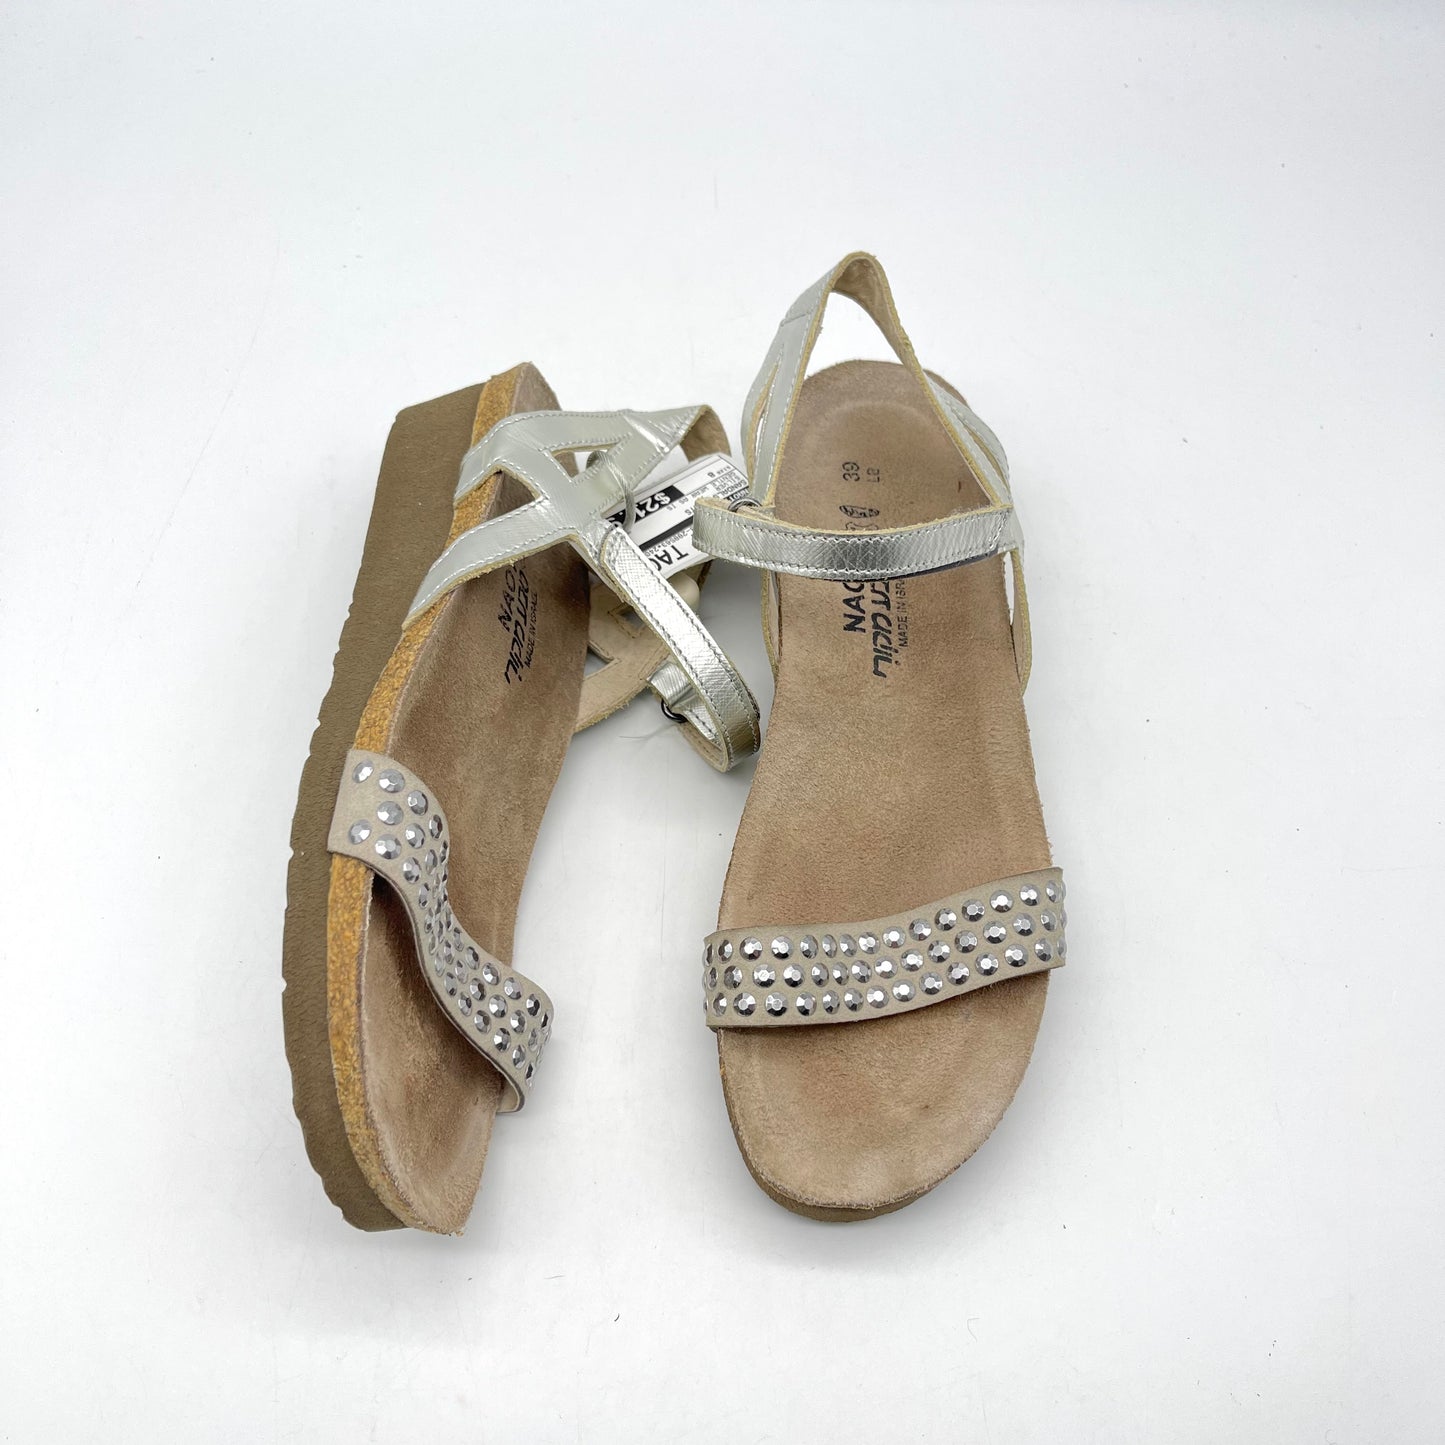 Sandals Flats By Naot  Size: 8